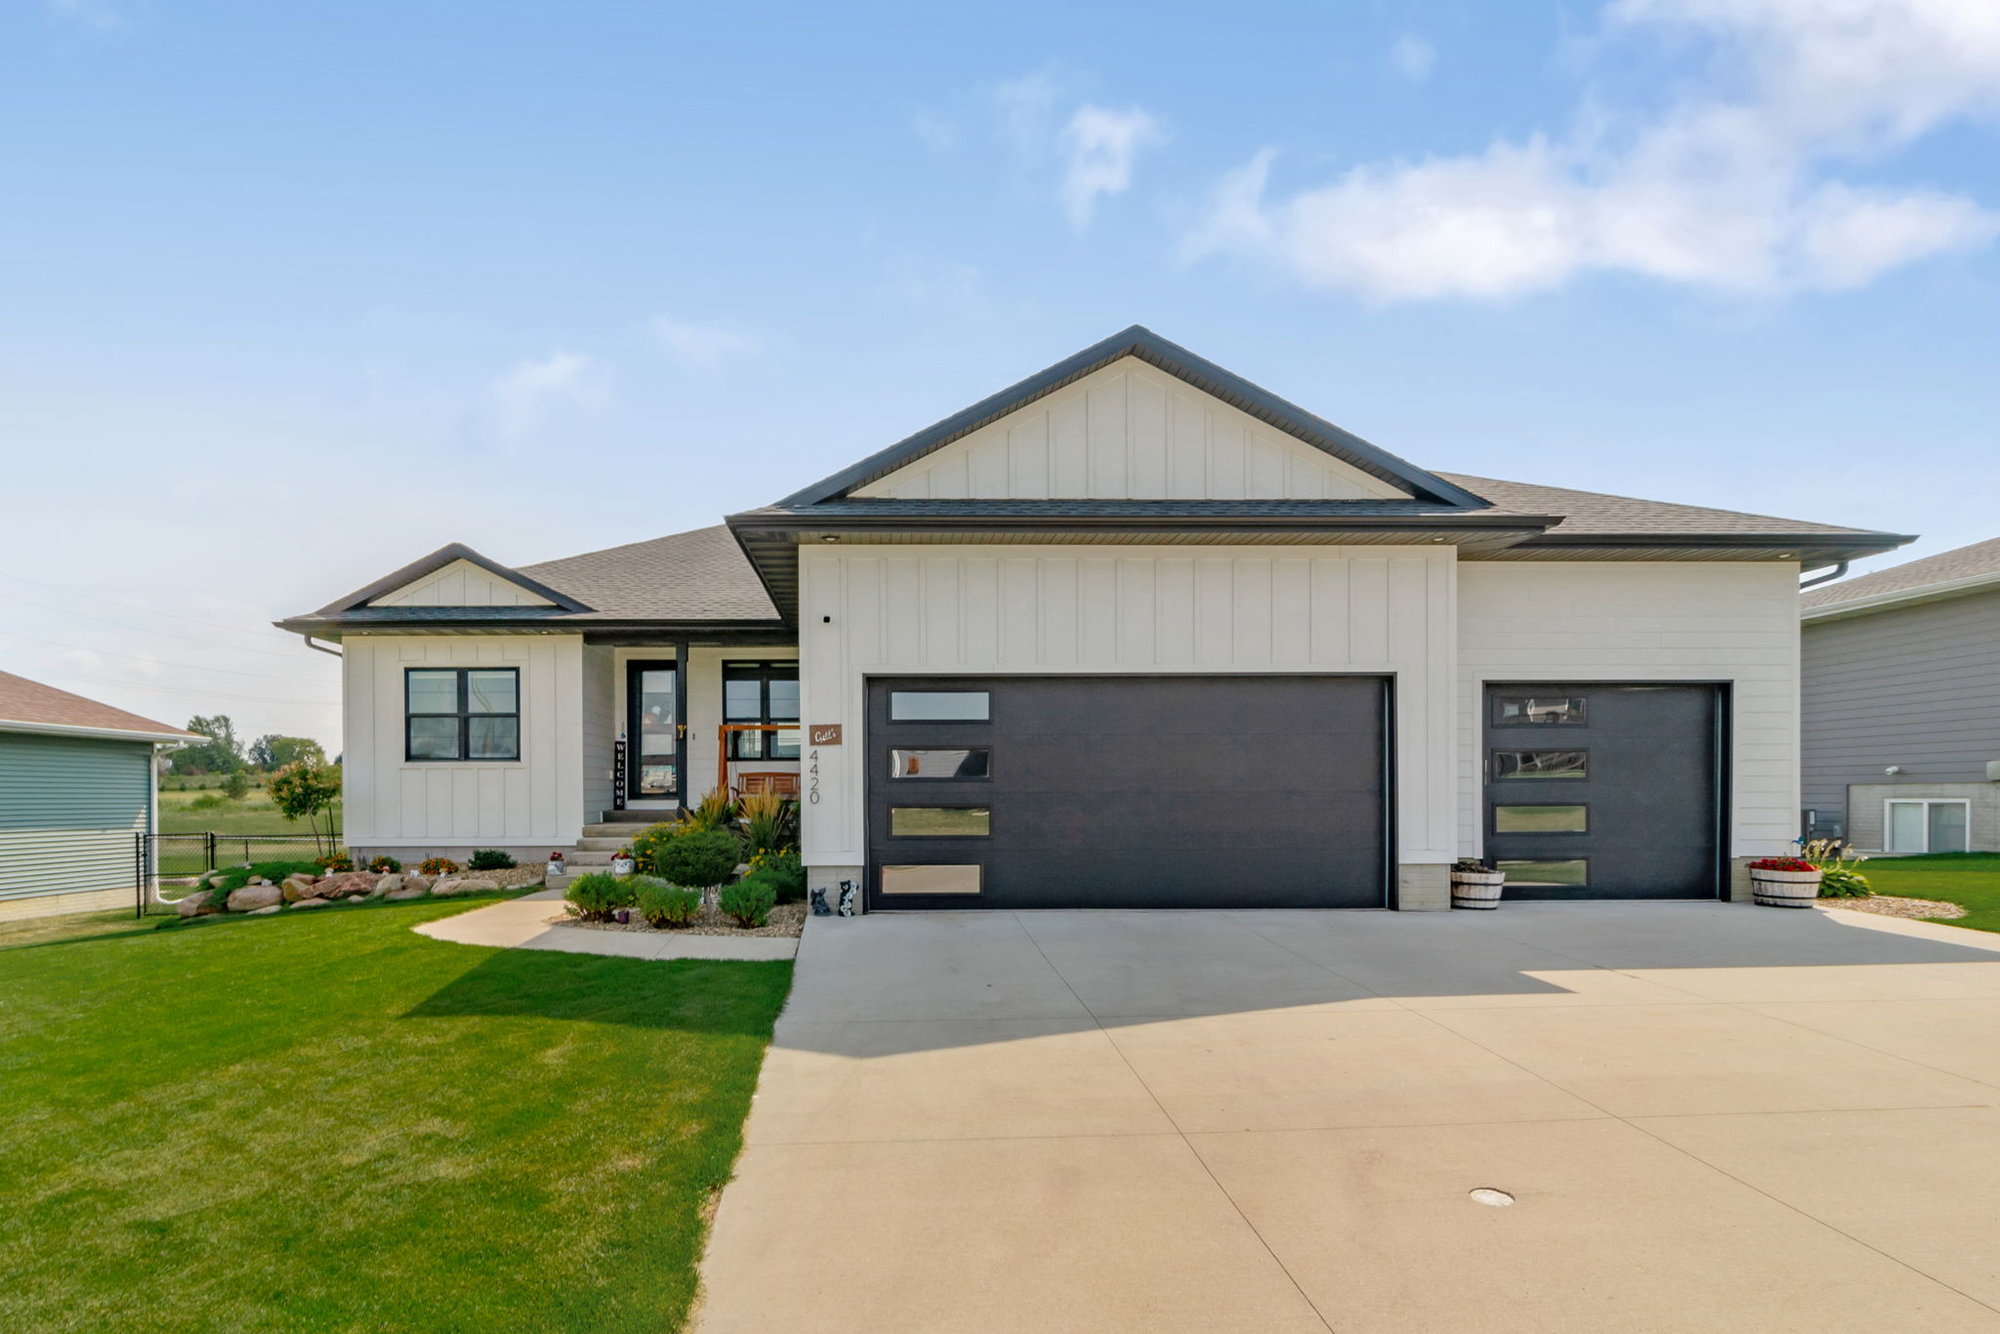 Don't Miss this Stunning Newly Built Ranch in the Prairie West Neighborhood of Cedar Falls Iowa